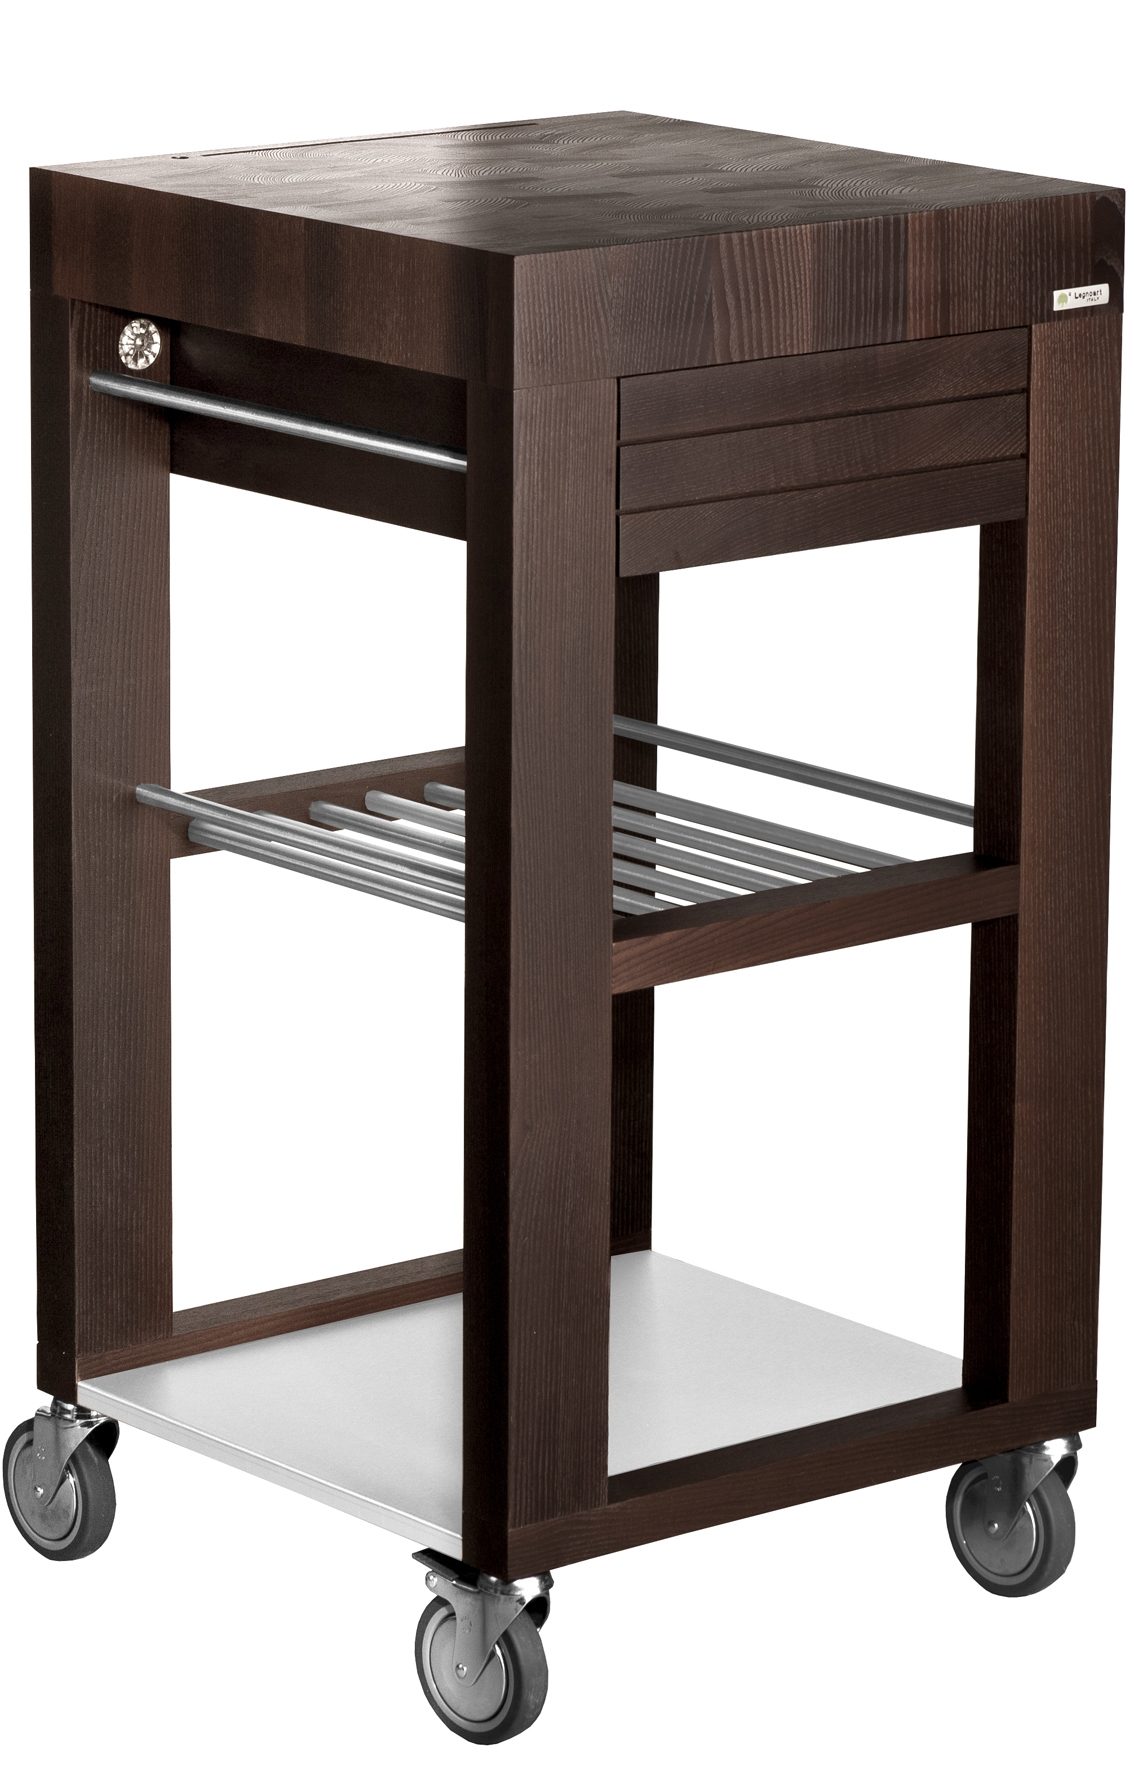 ####LABOR KITCHEN TROLLEY THERMO ASH WOOD